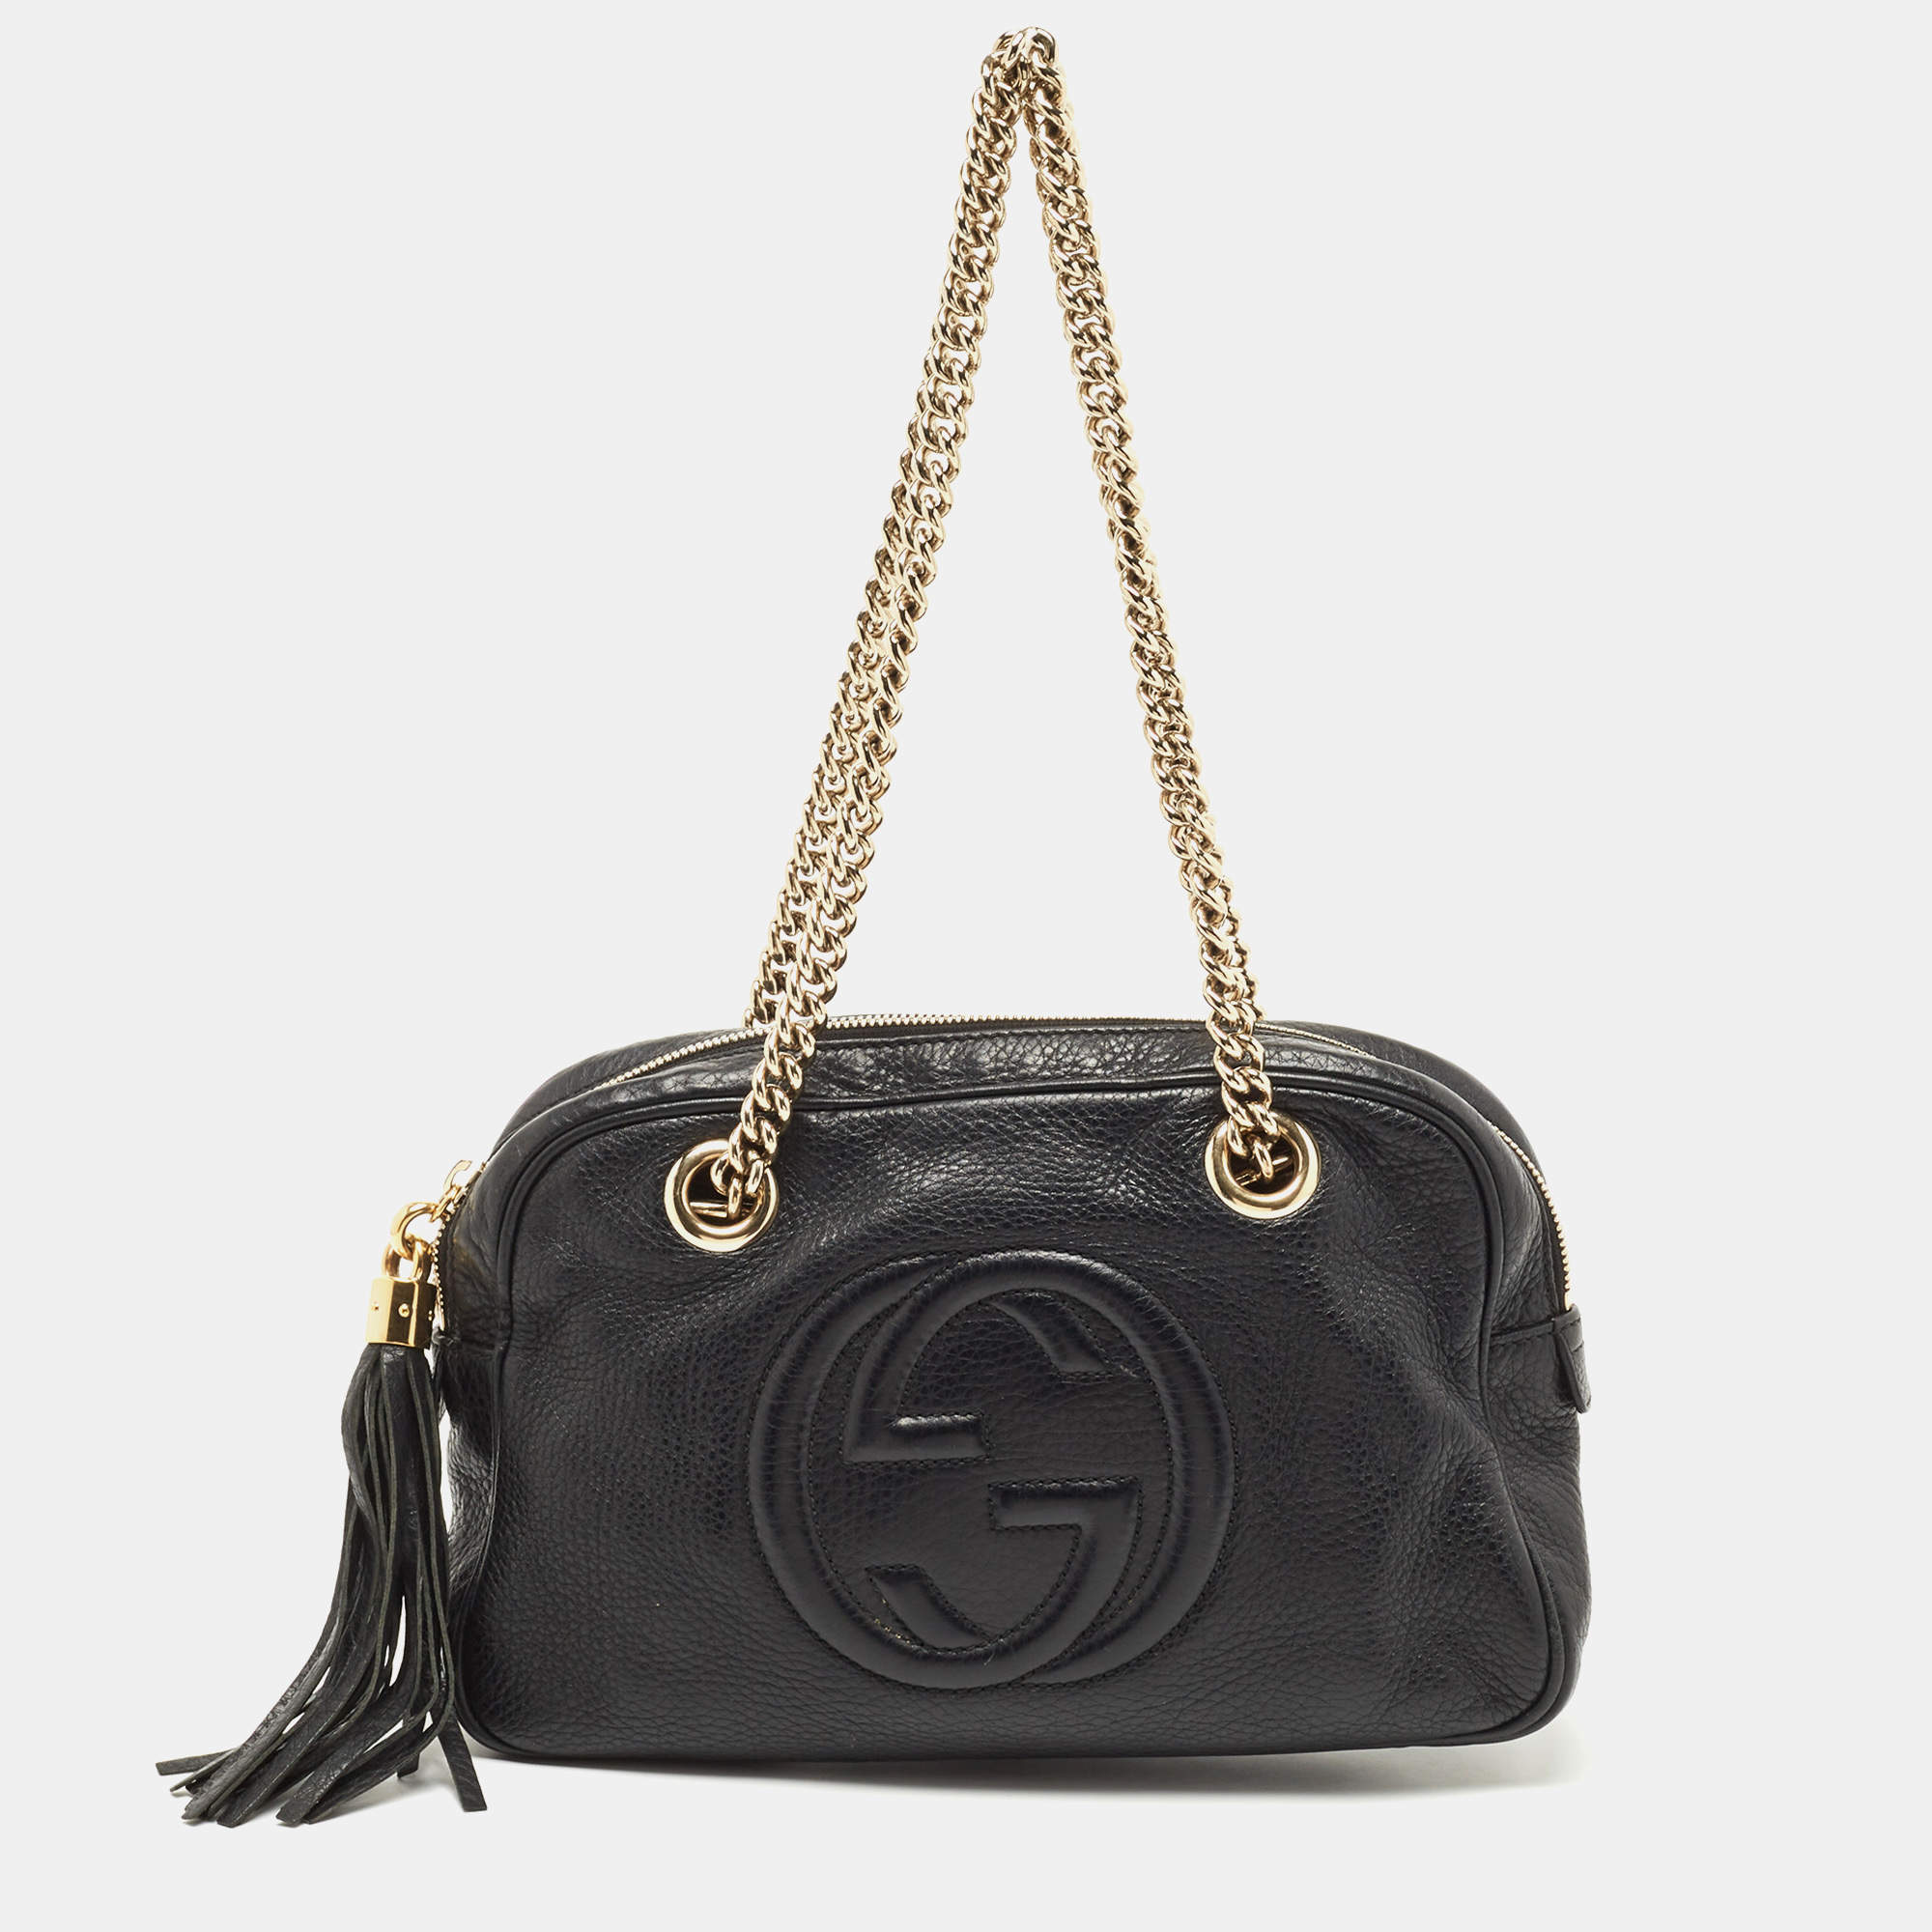 Luxury women's bags - Gucci Soho shoulder bag in black grained leather